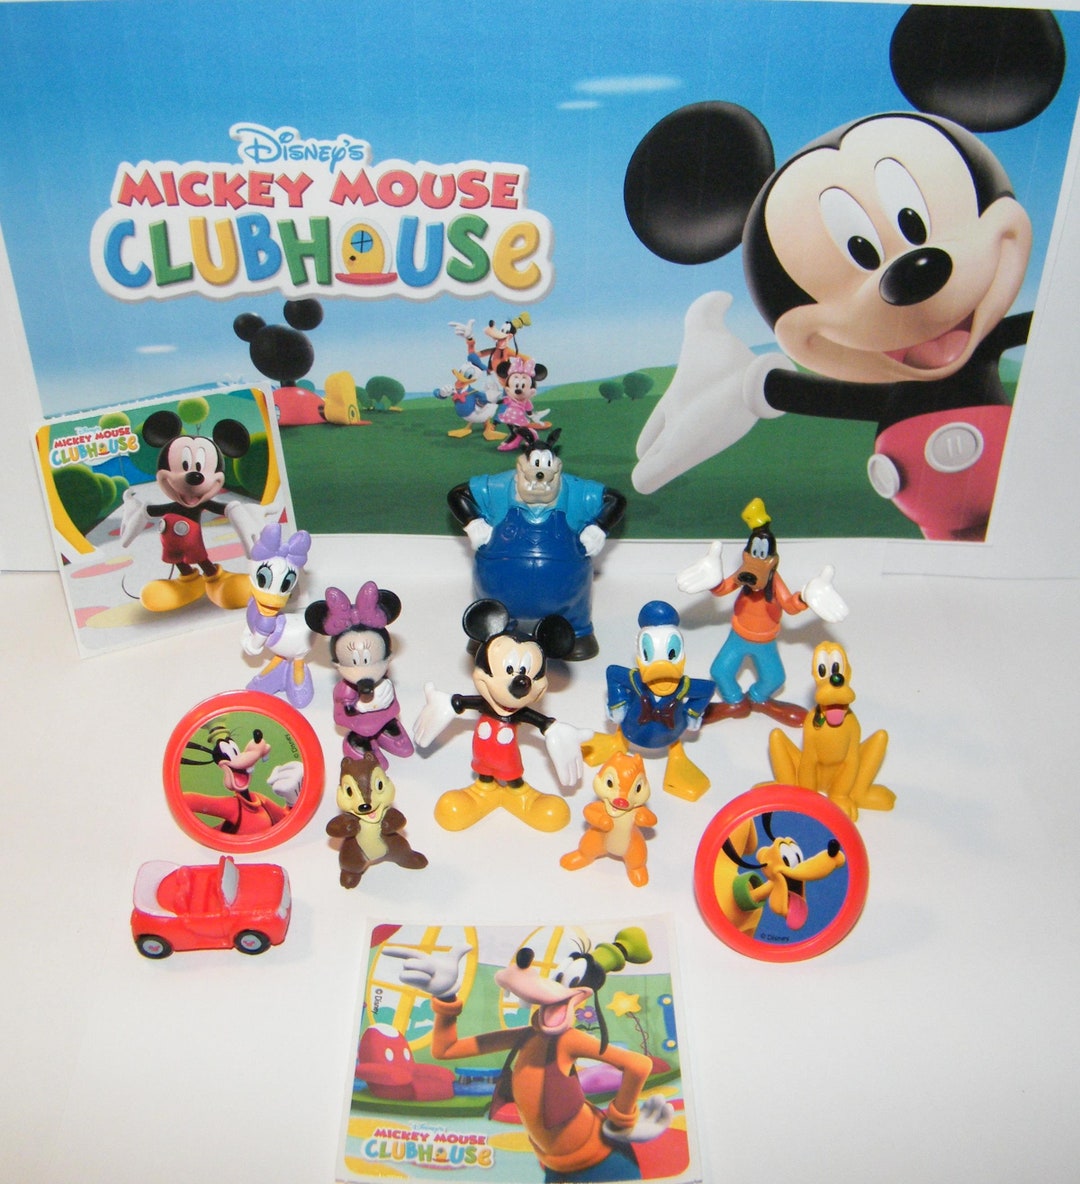 Mickey and Friends Mini Figures 5 Pack - Toy Bundle with 5 Cupcake Topper Figurines Including Mickey, Minnie, and More Plus Mickey Stickers and More